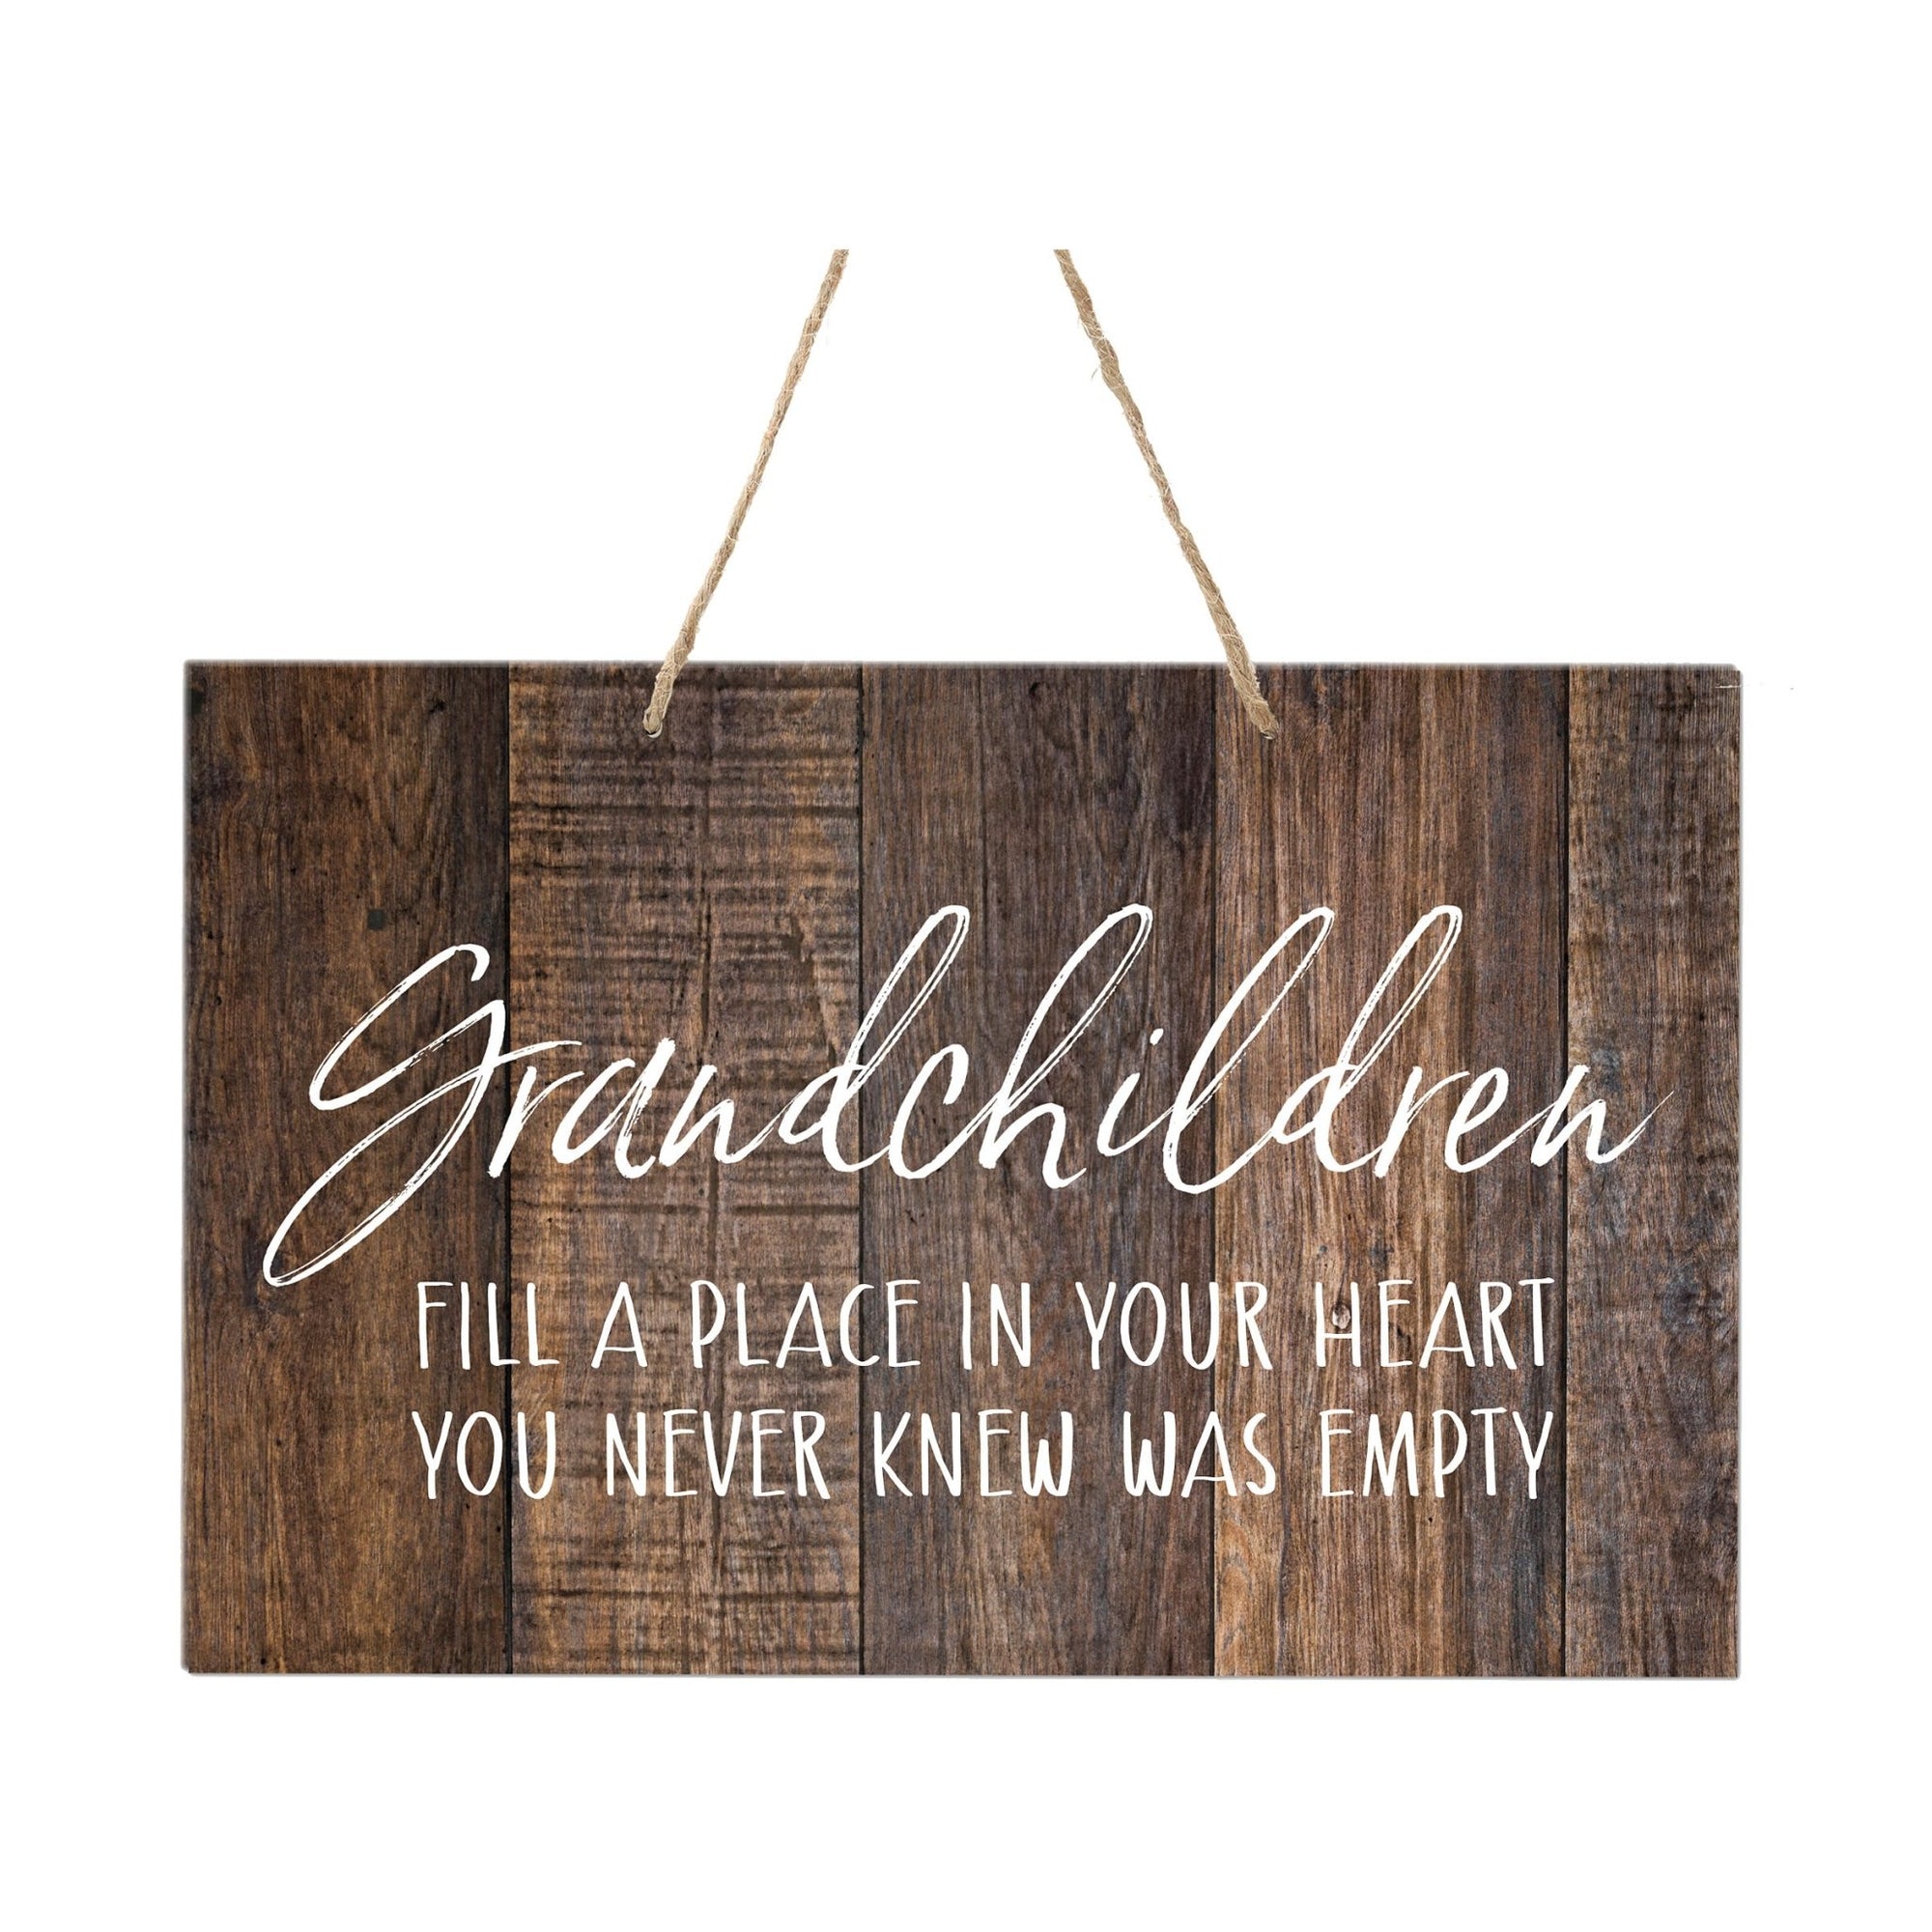 Grand Children Fill A Place In Your Heart Wall Hanging Sign 12” x 8” - LifeSong Milestones